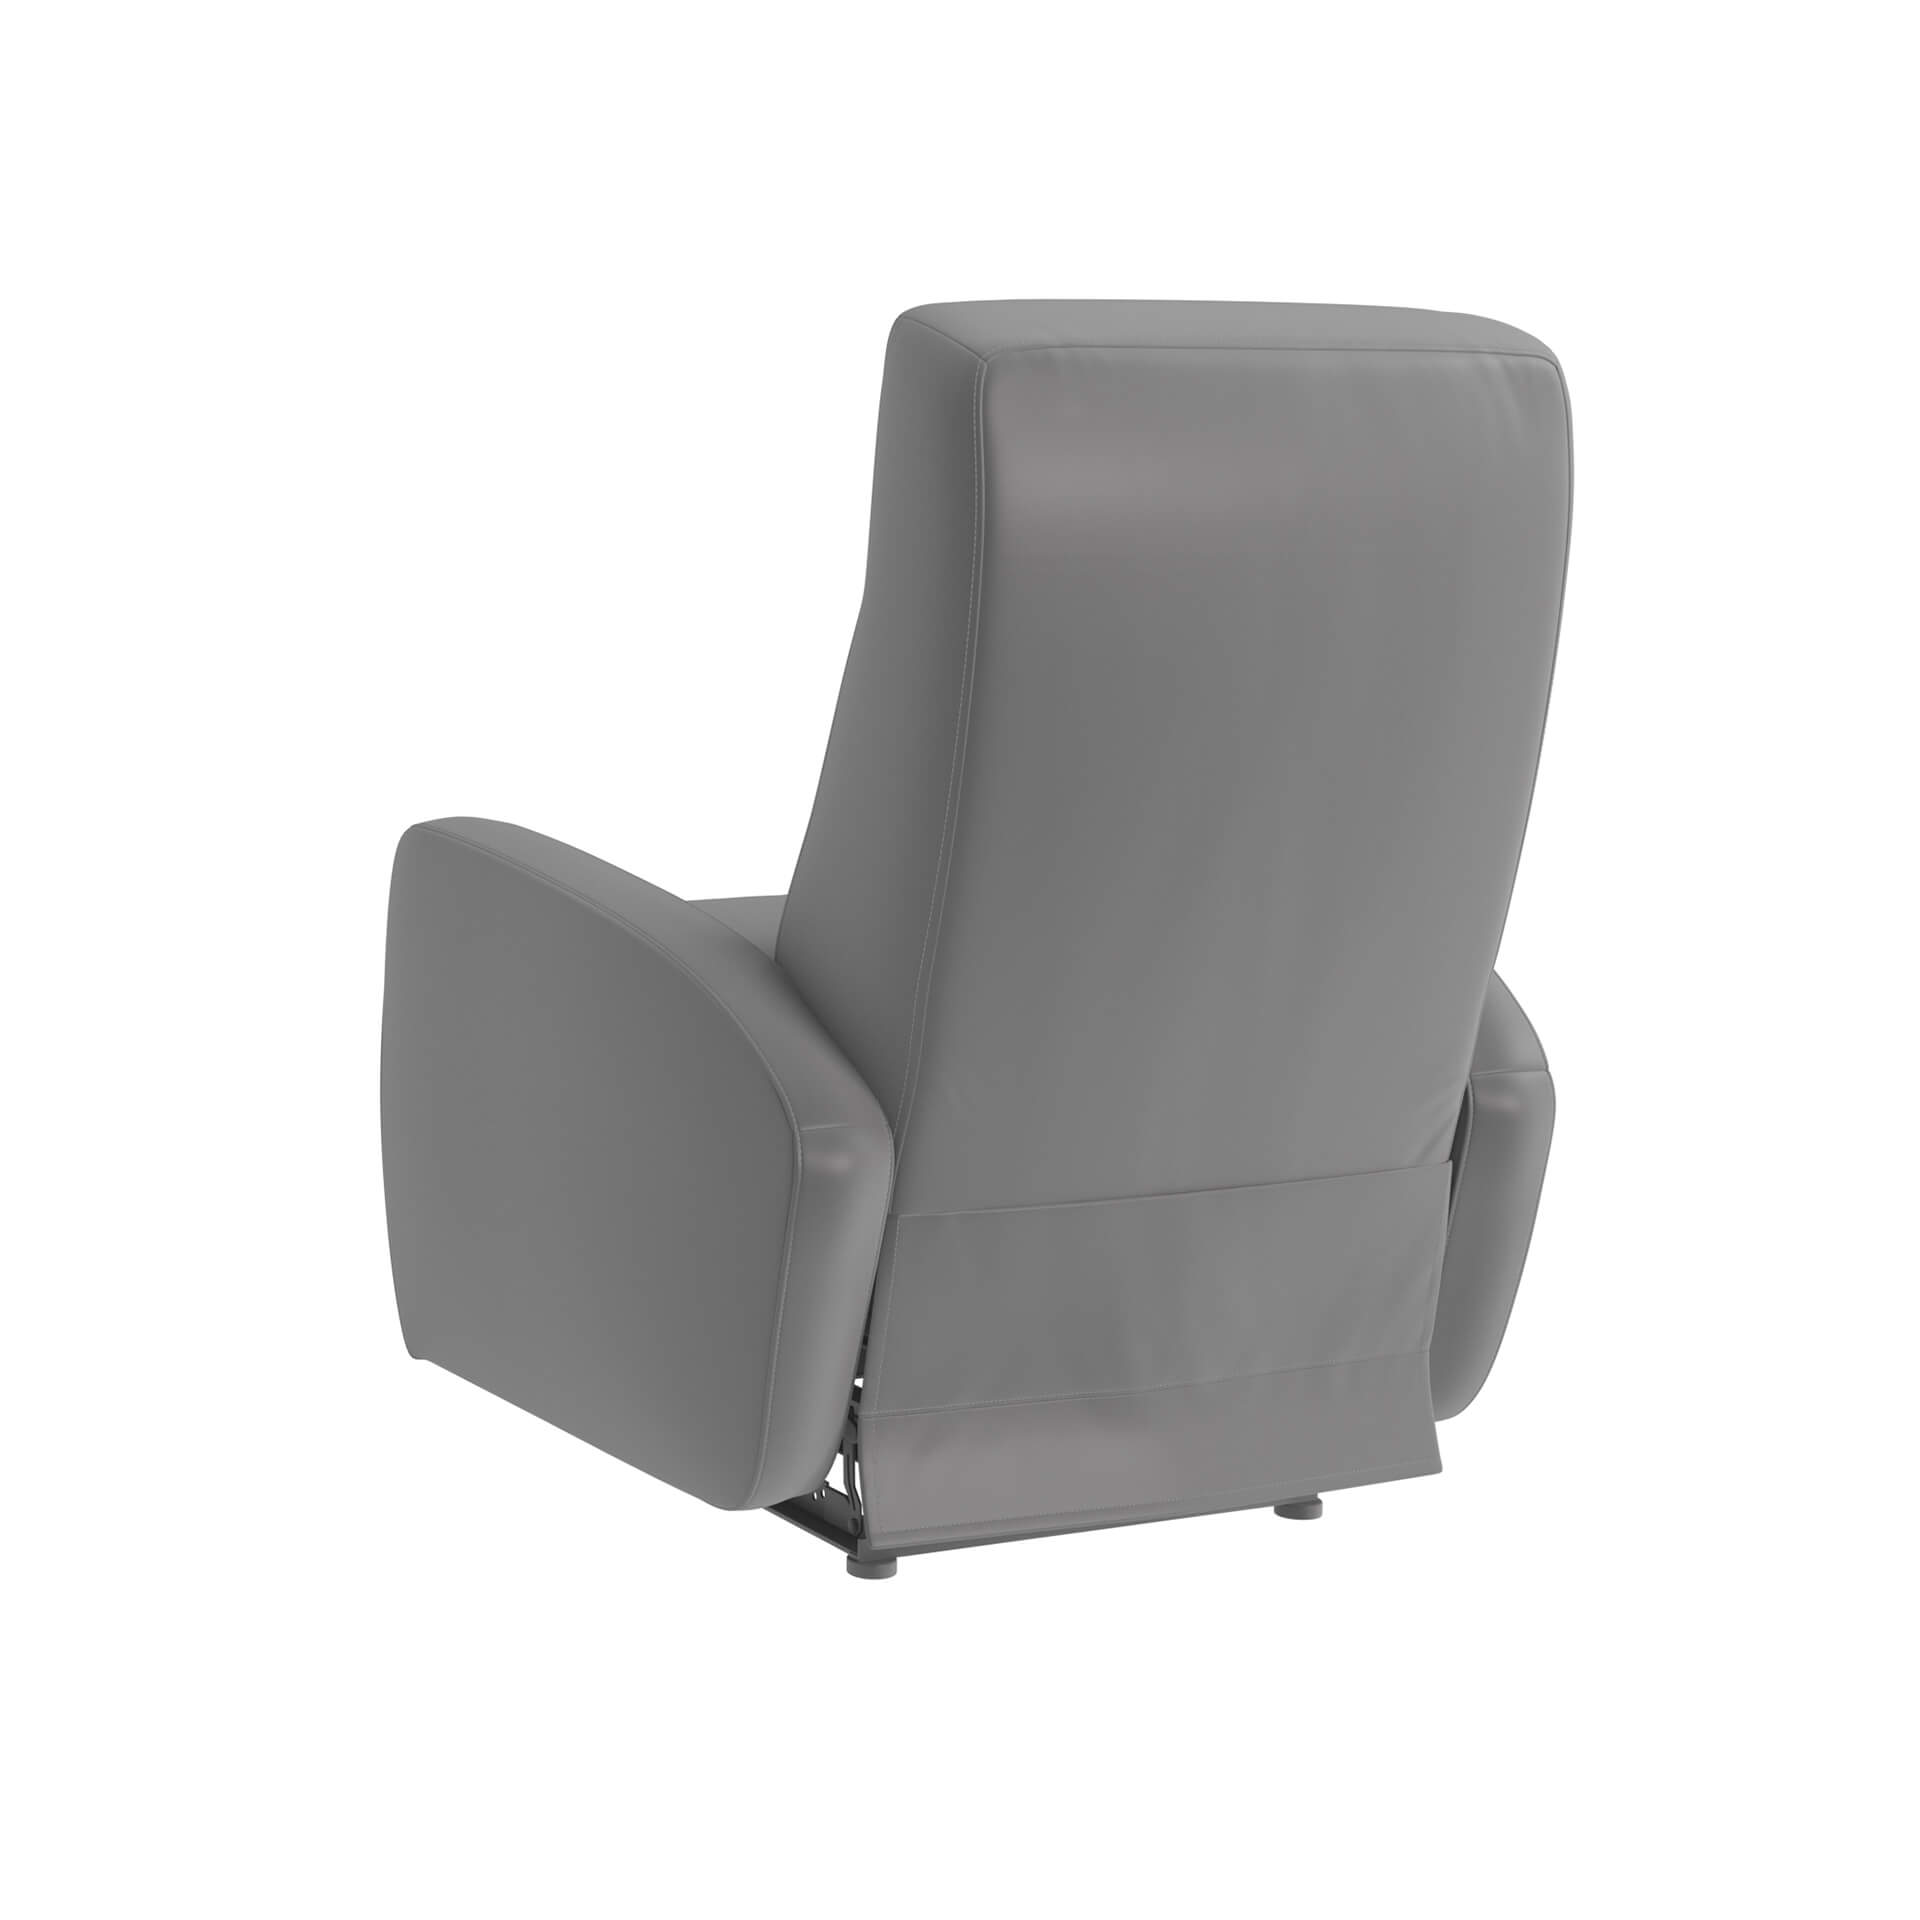 Back View of a Massage Armchair 3D Model